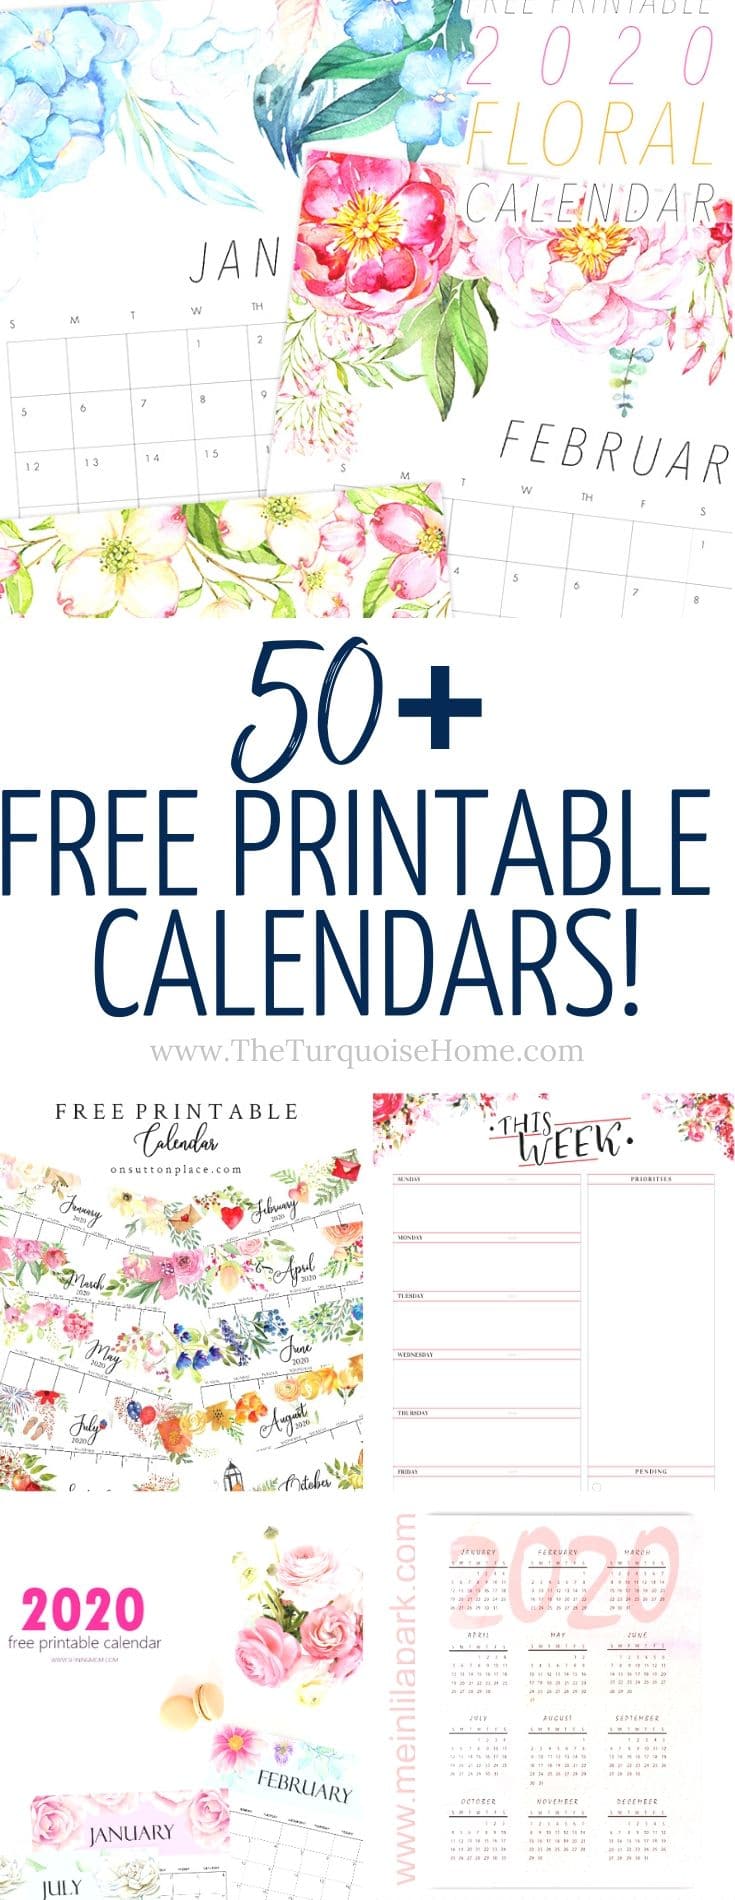 50 free printable calendars for 2020 the turquoise home